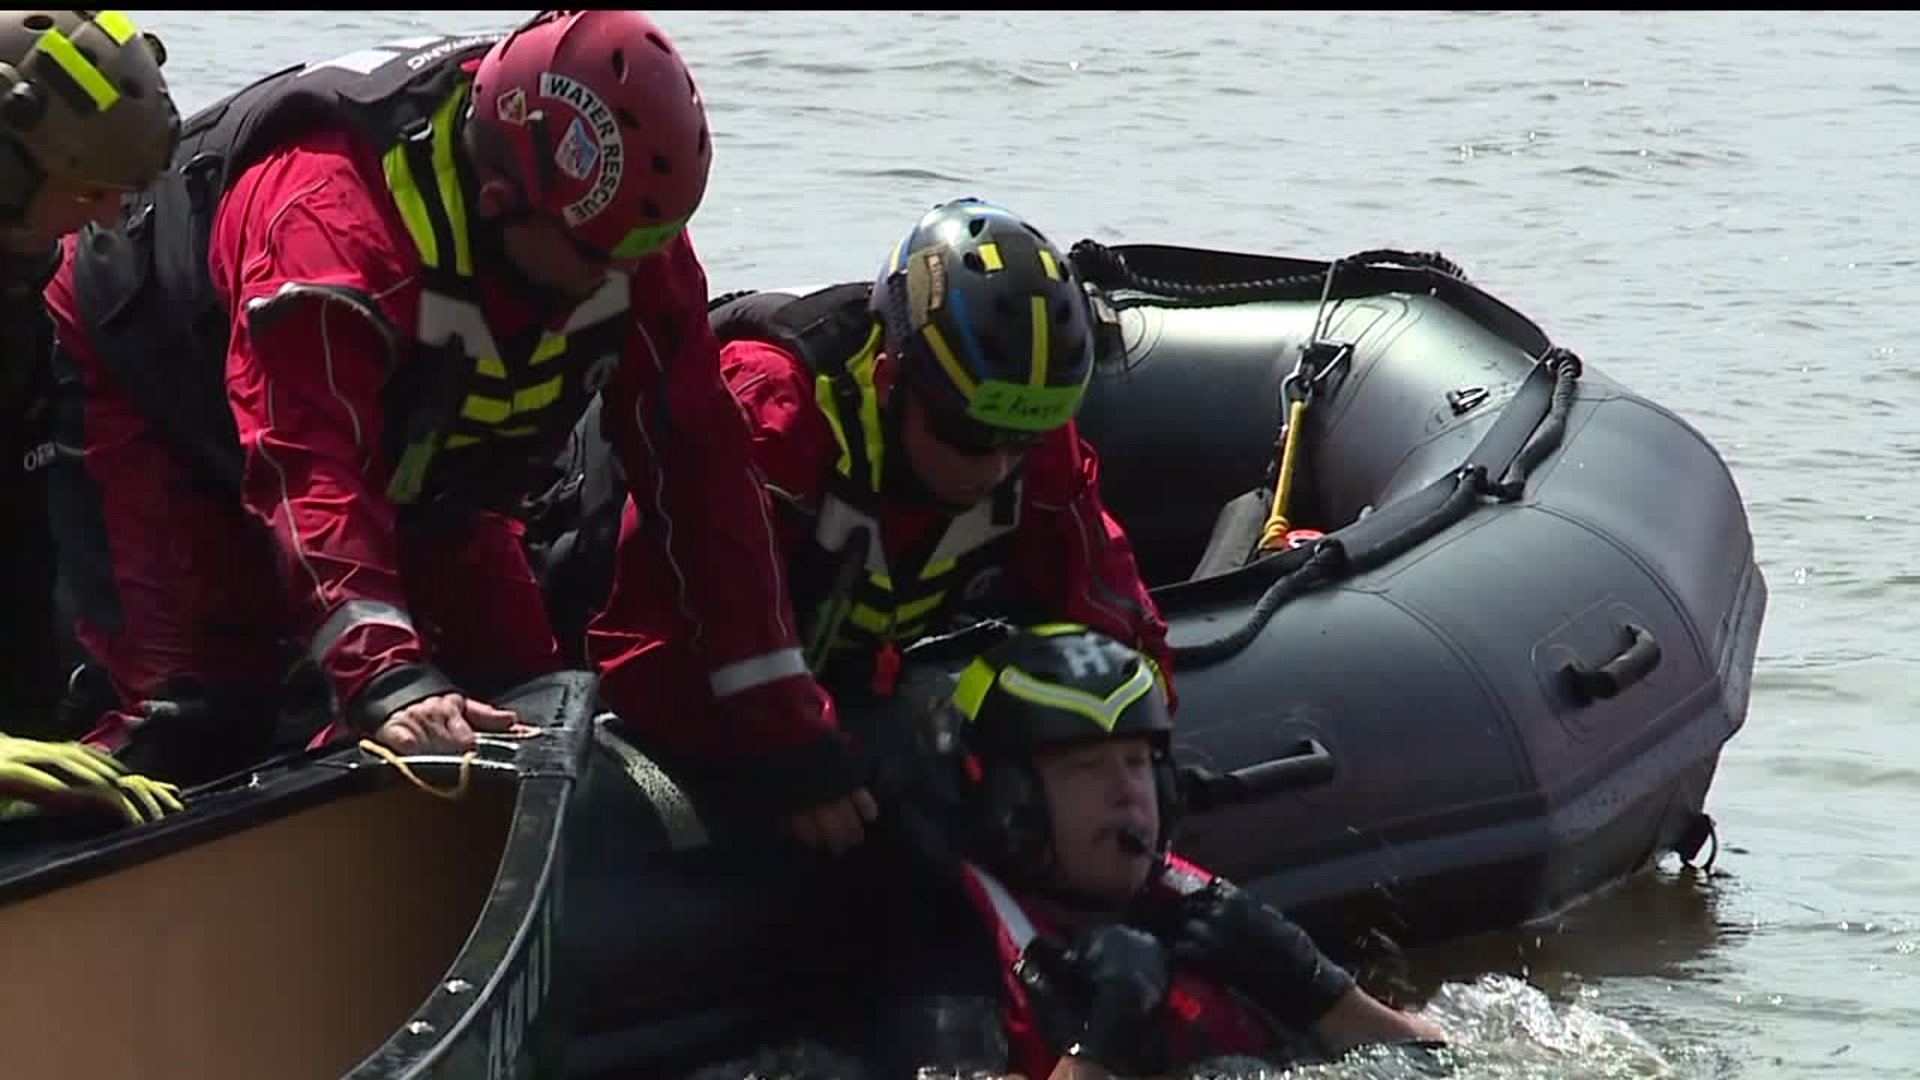 First responders learn new water rescue skills in Dauphin County